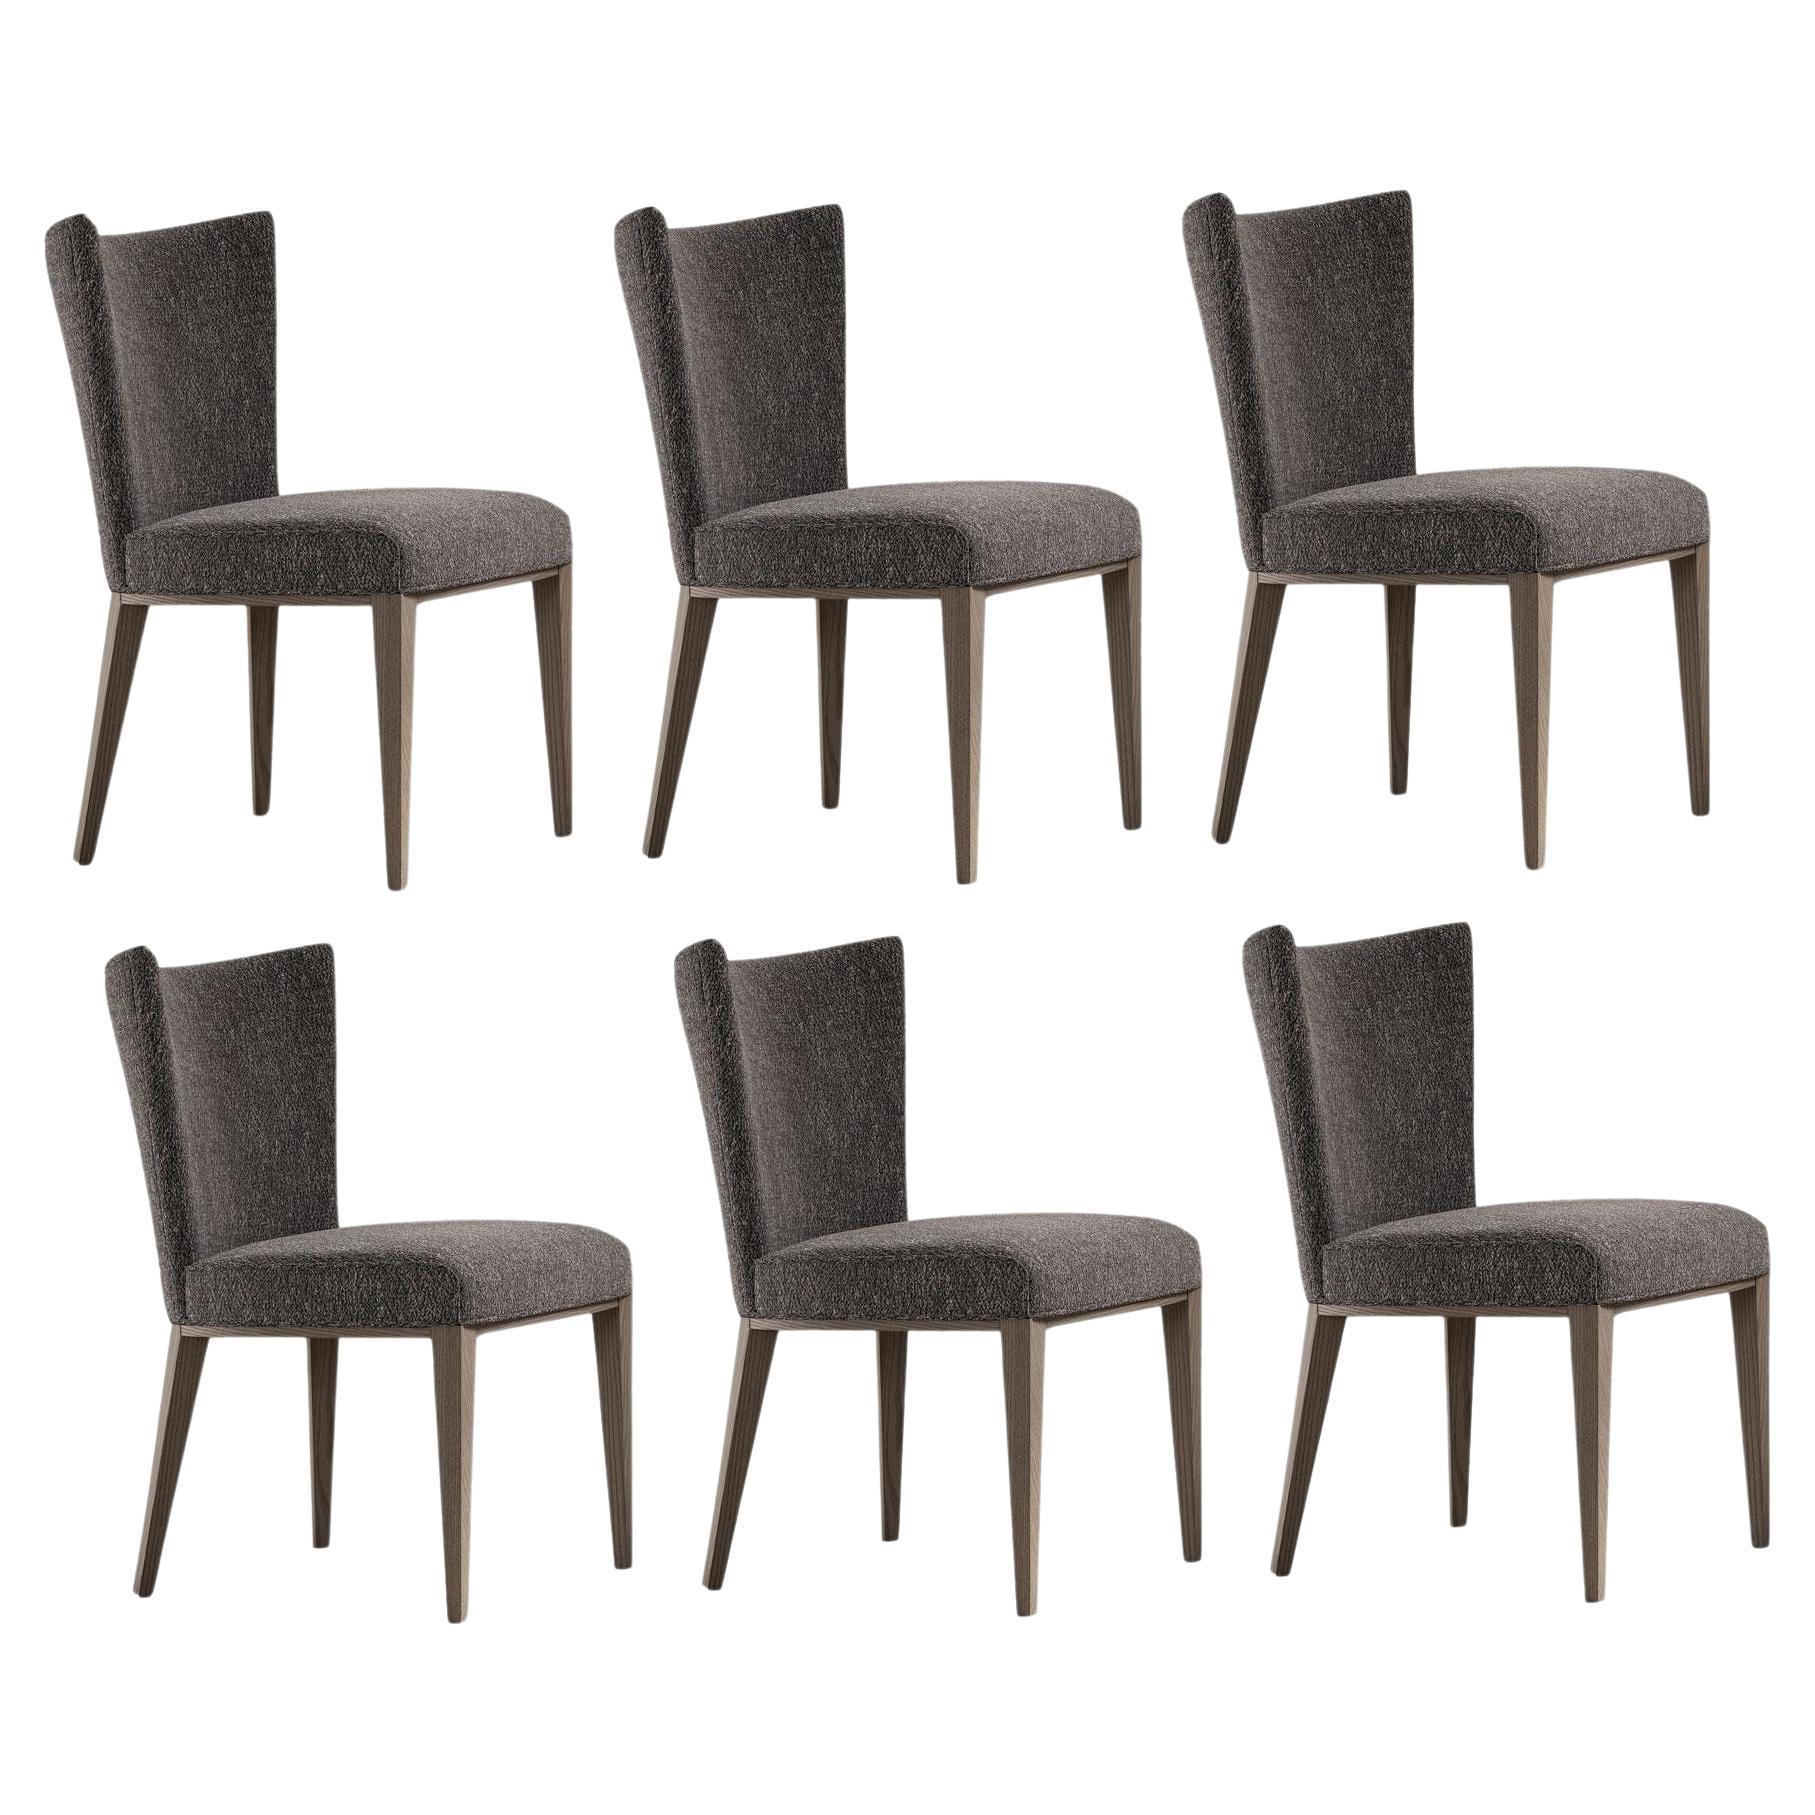 Set of 6 Contemporary Dining Chairs Upholstered in Sophisticated Melange Fabric